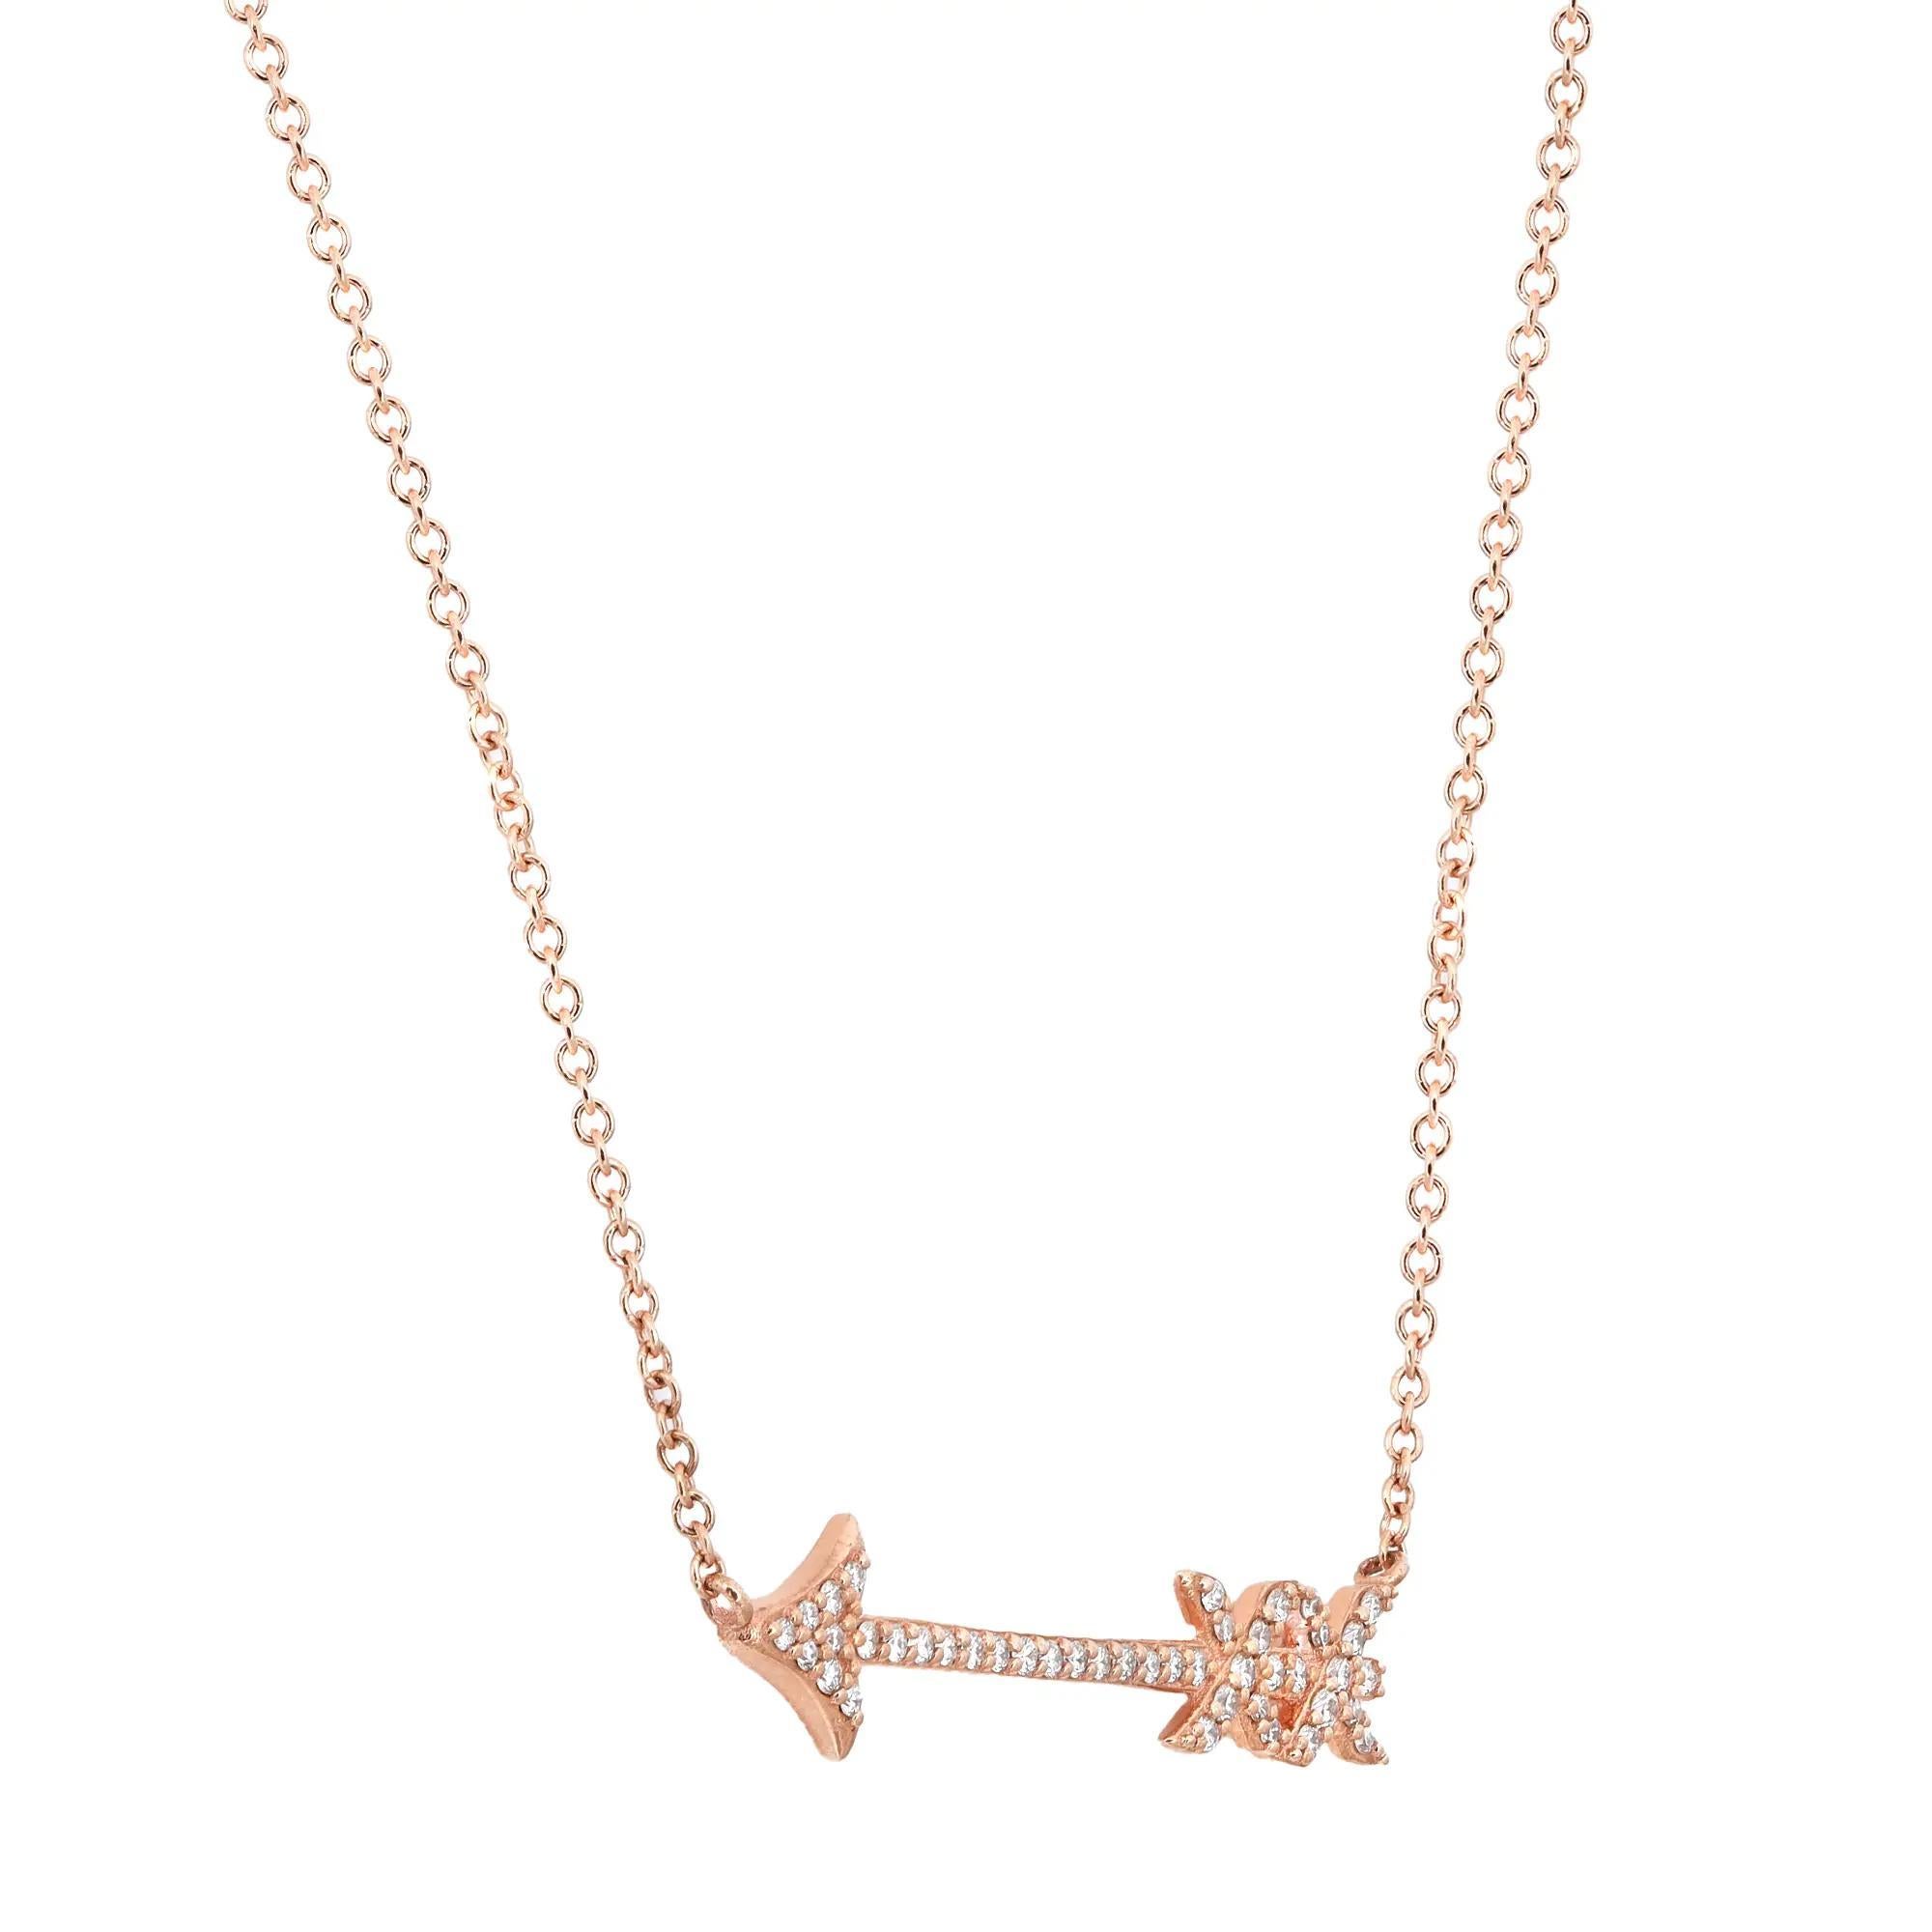 This gorgeous Tiffany & Co. Paloma’s Graffiti Arrow Pendant Necklace is a beautiful piece to accentuate your overall look. Crafted in 18K rose gold, this necklace features an arrow pendant studded with sparkling round brilliant cut diamonds weighing